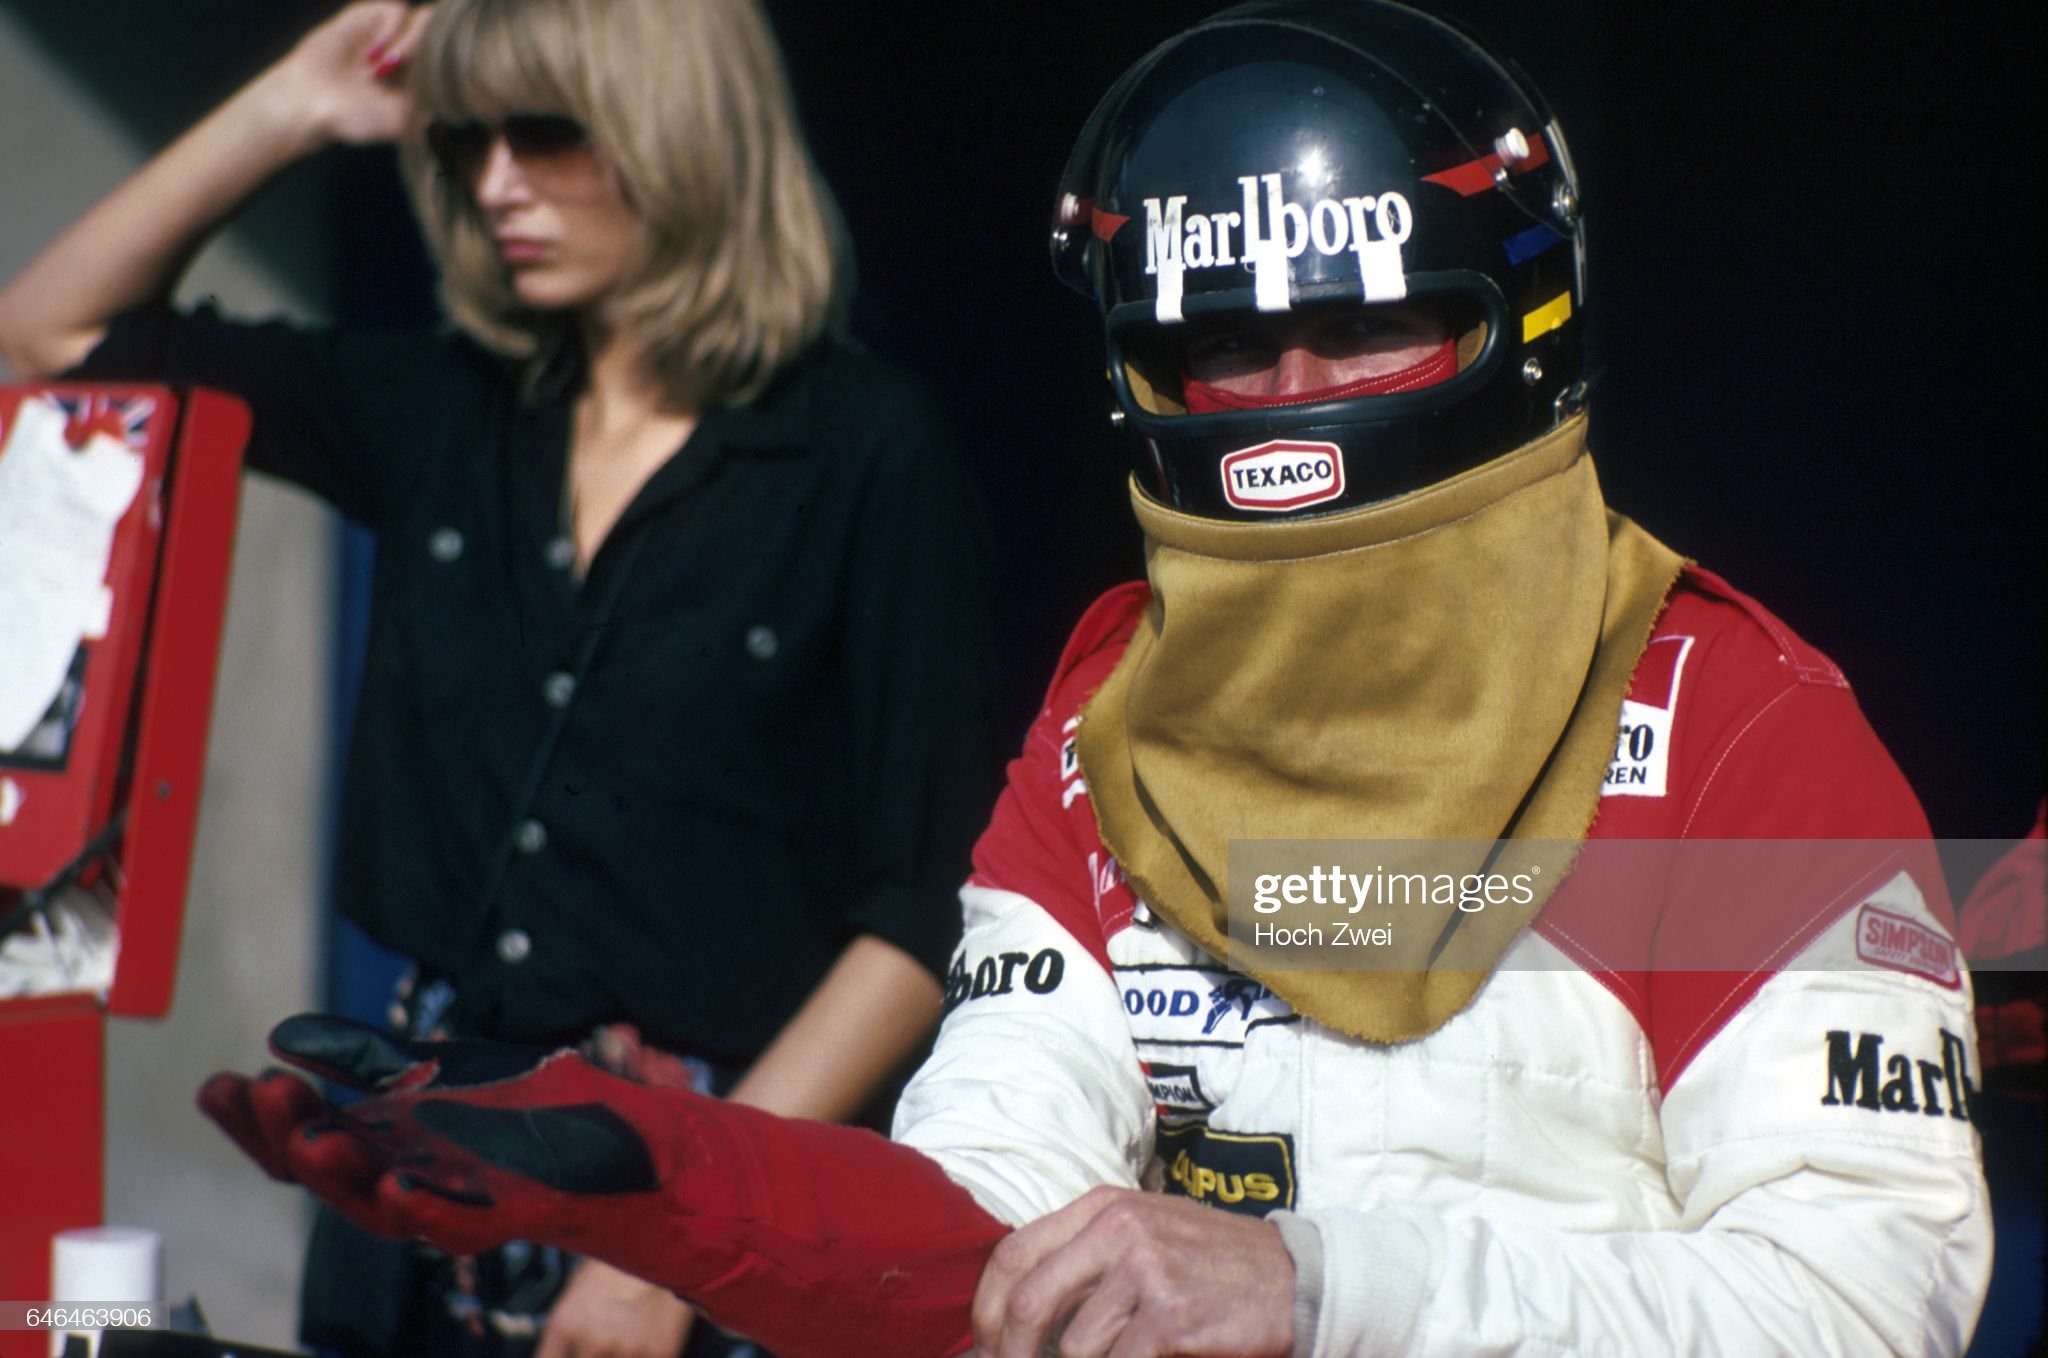 James Hunt in the McLaren pit at the Italian Grand Prix in Monza on 10 September 1978.